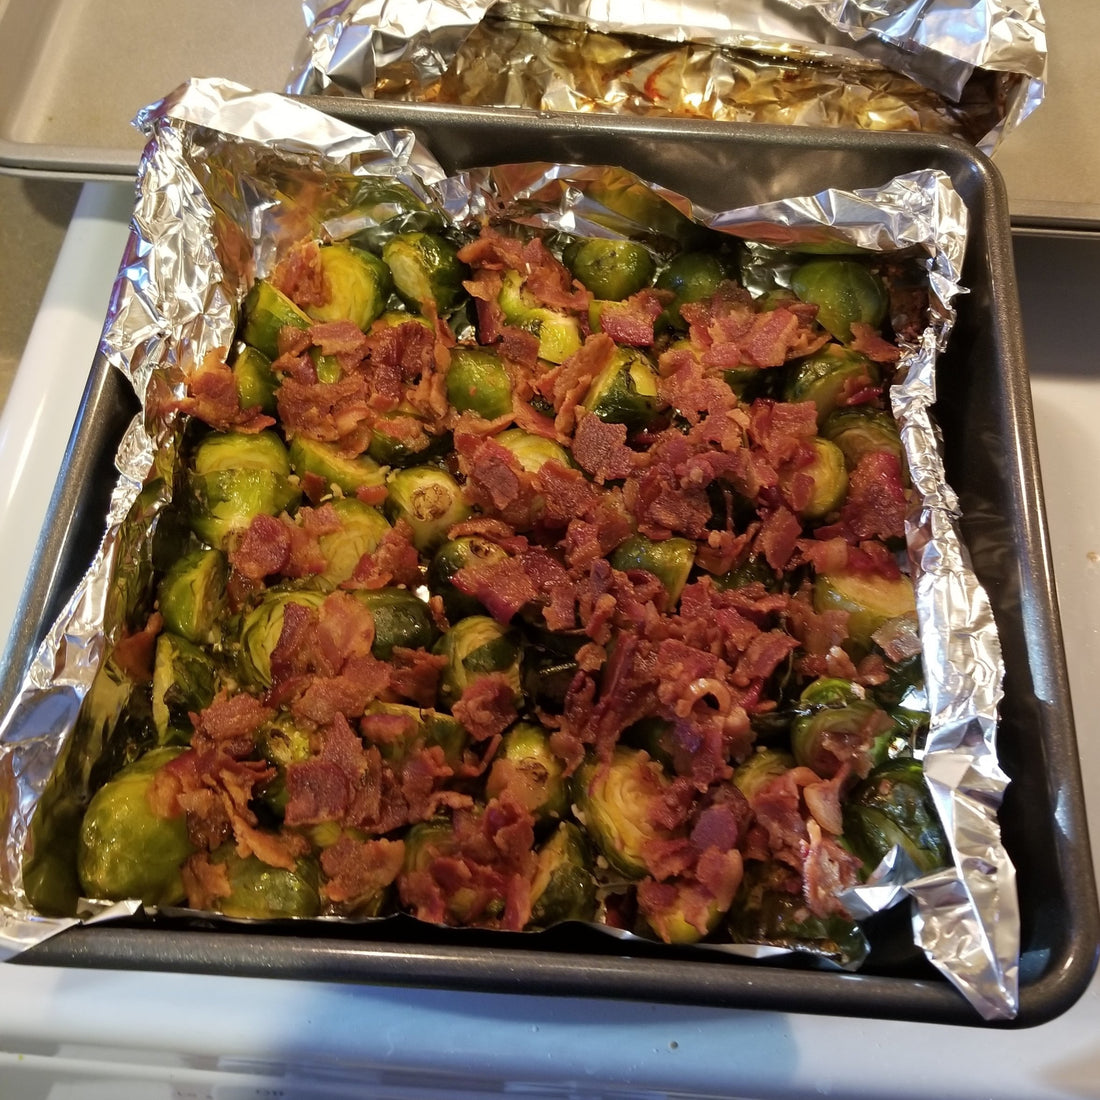 Grilled Venison Bottom Round Steaks w/ Bacon Garlic Brussel Sprouts by Caleb Pinor Zimmerman, MN